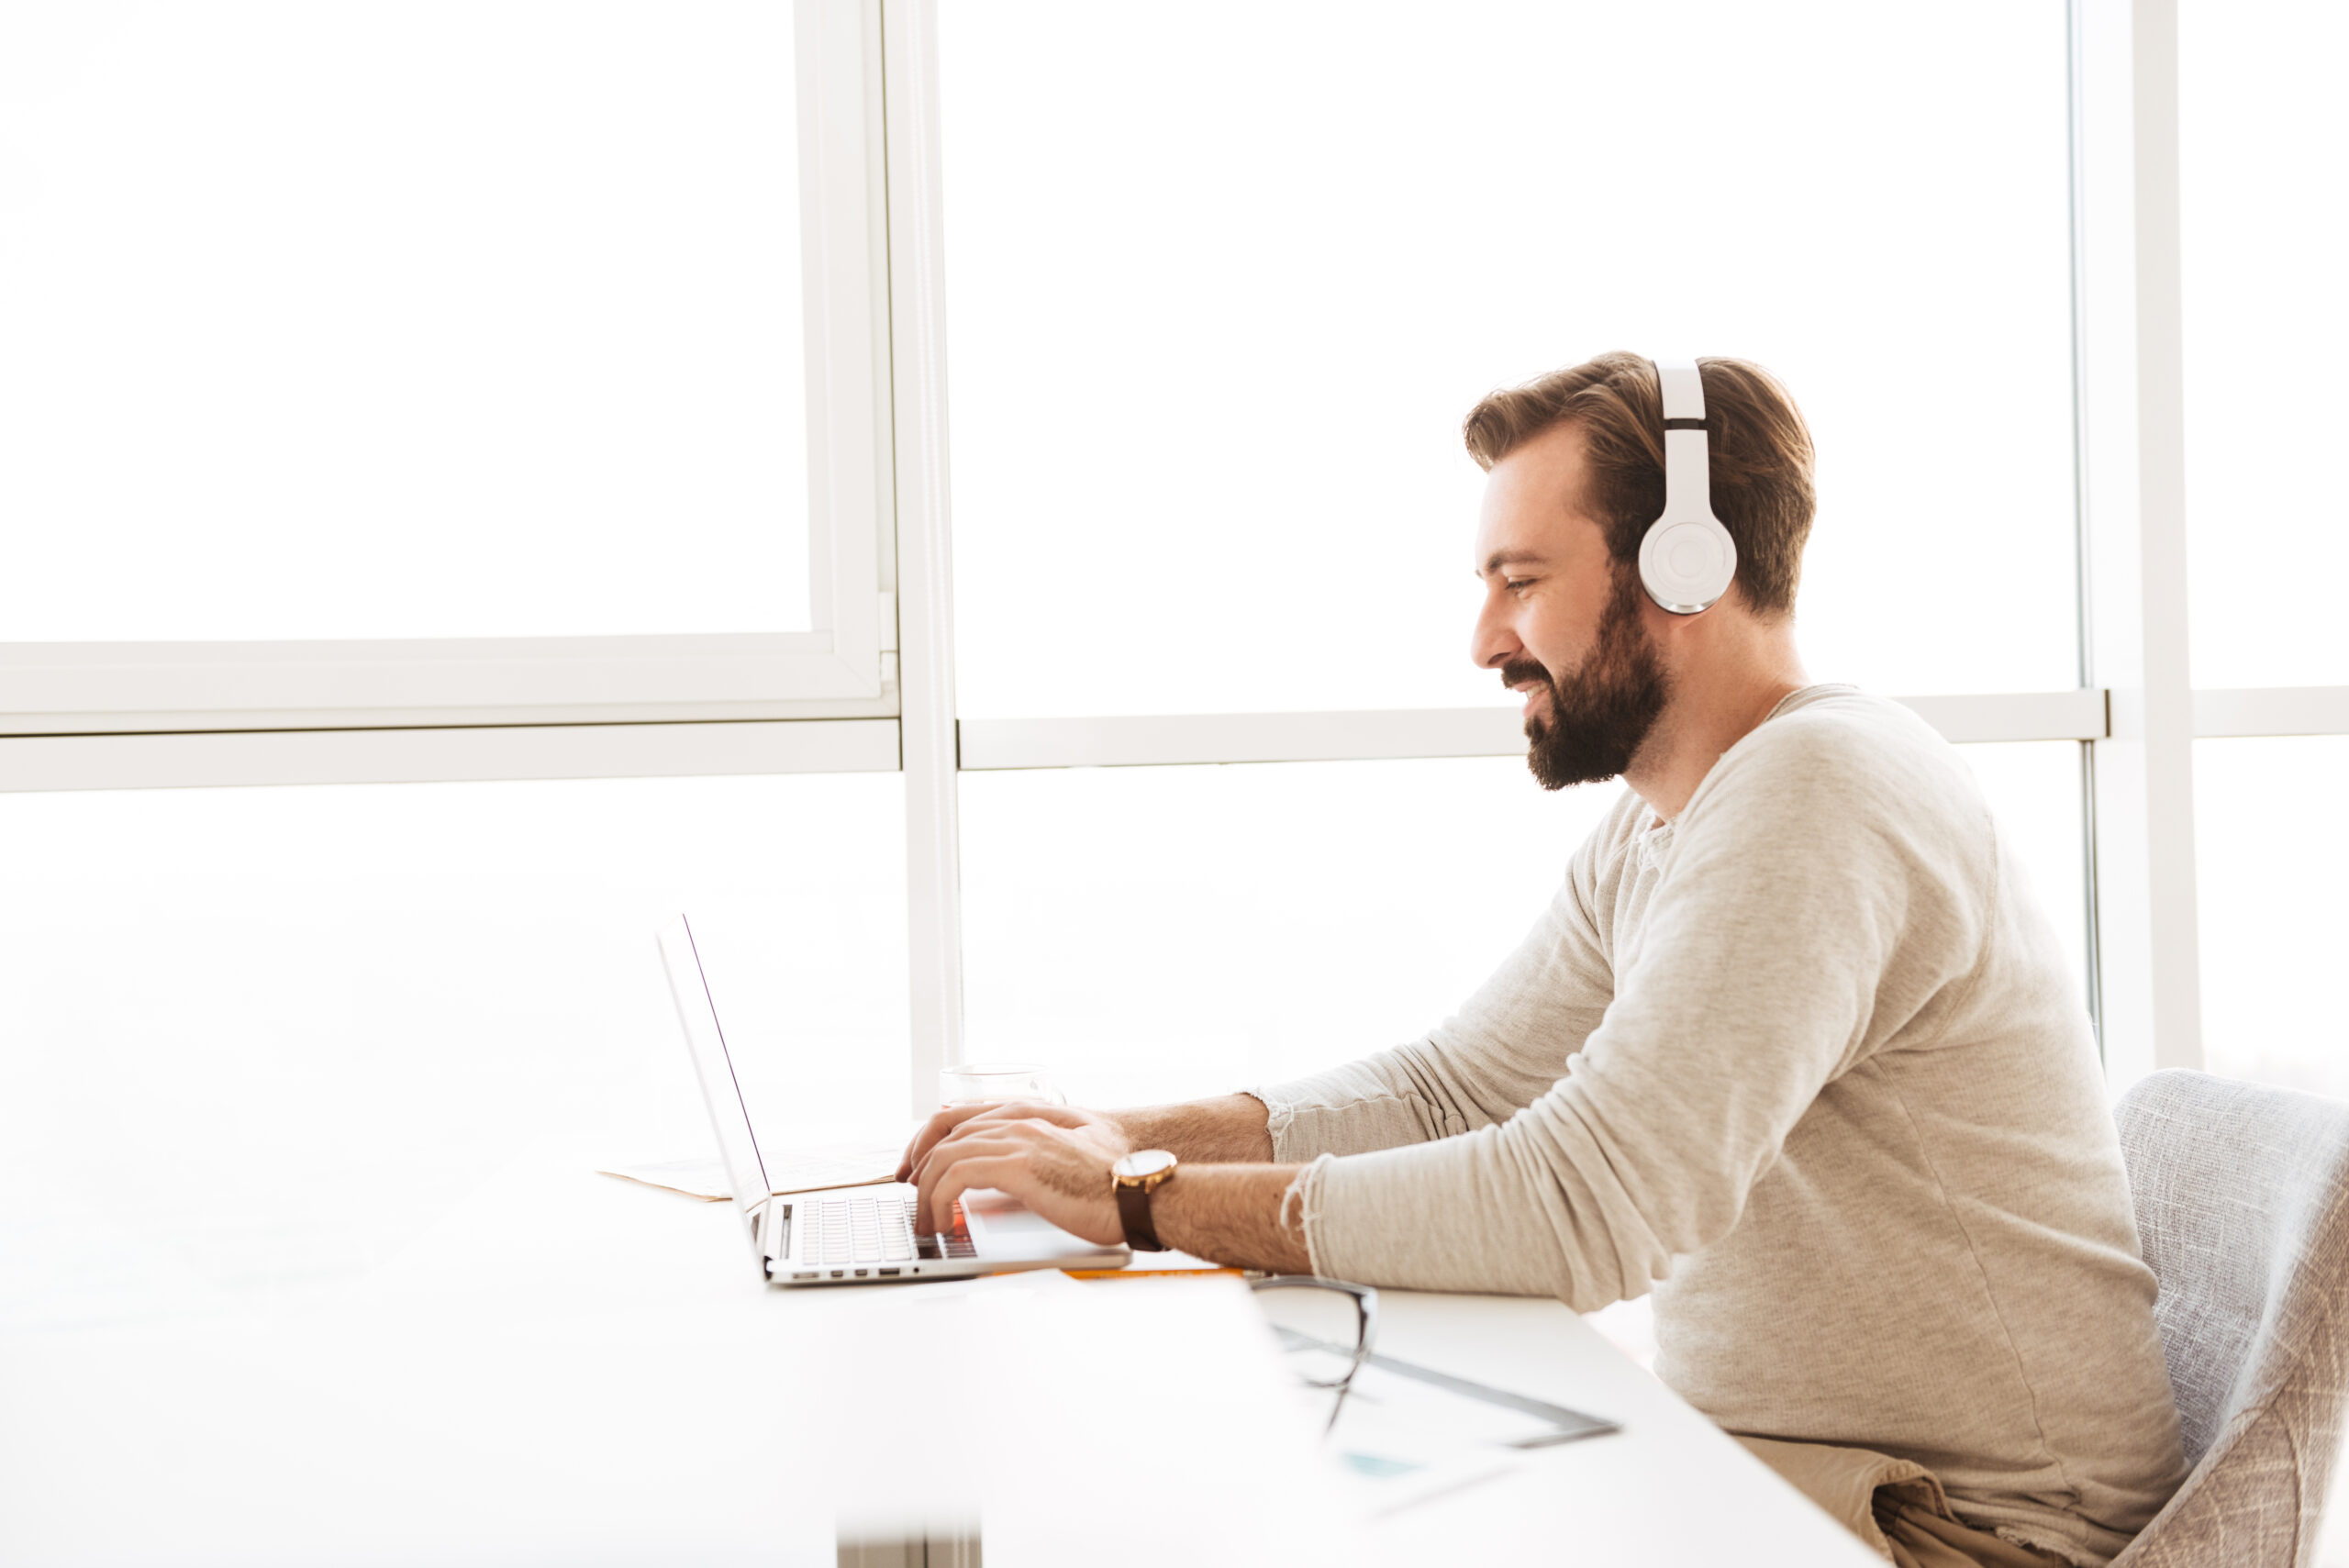 Image in profile of modern guy 30s using white headphones and communicating on laptop while resting in hotel apartment